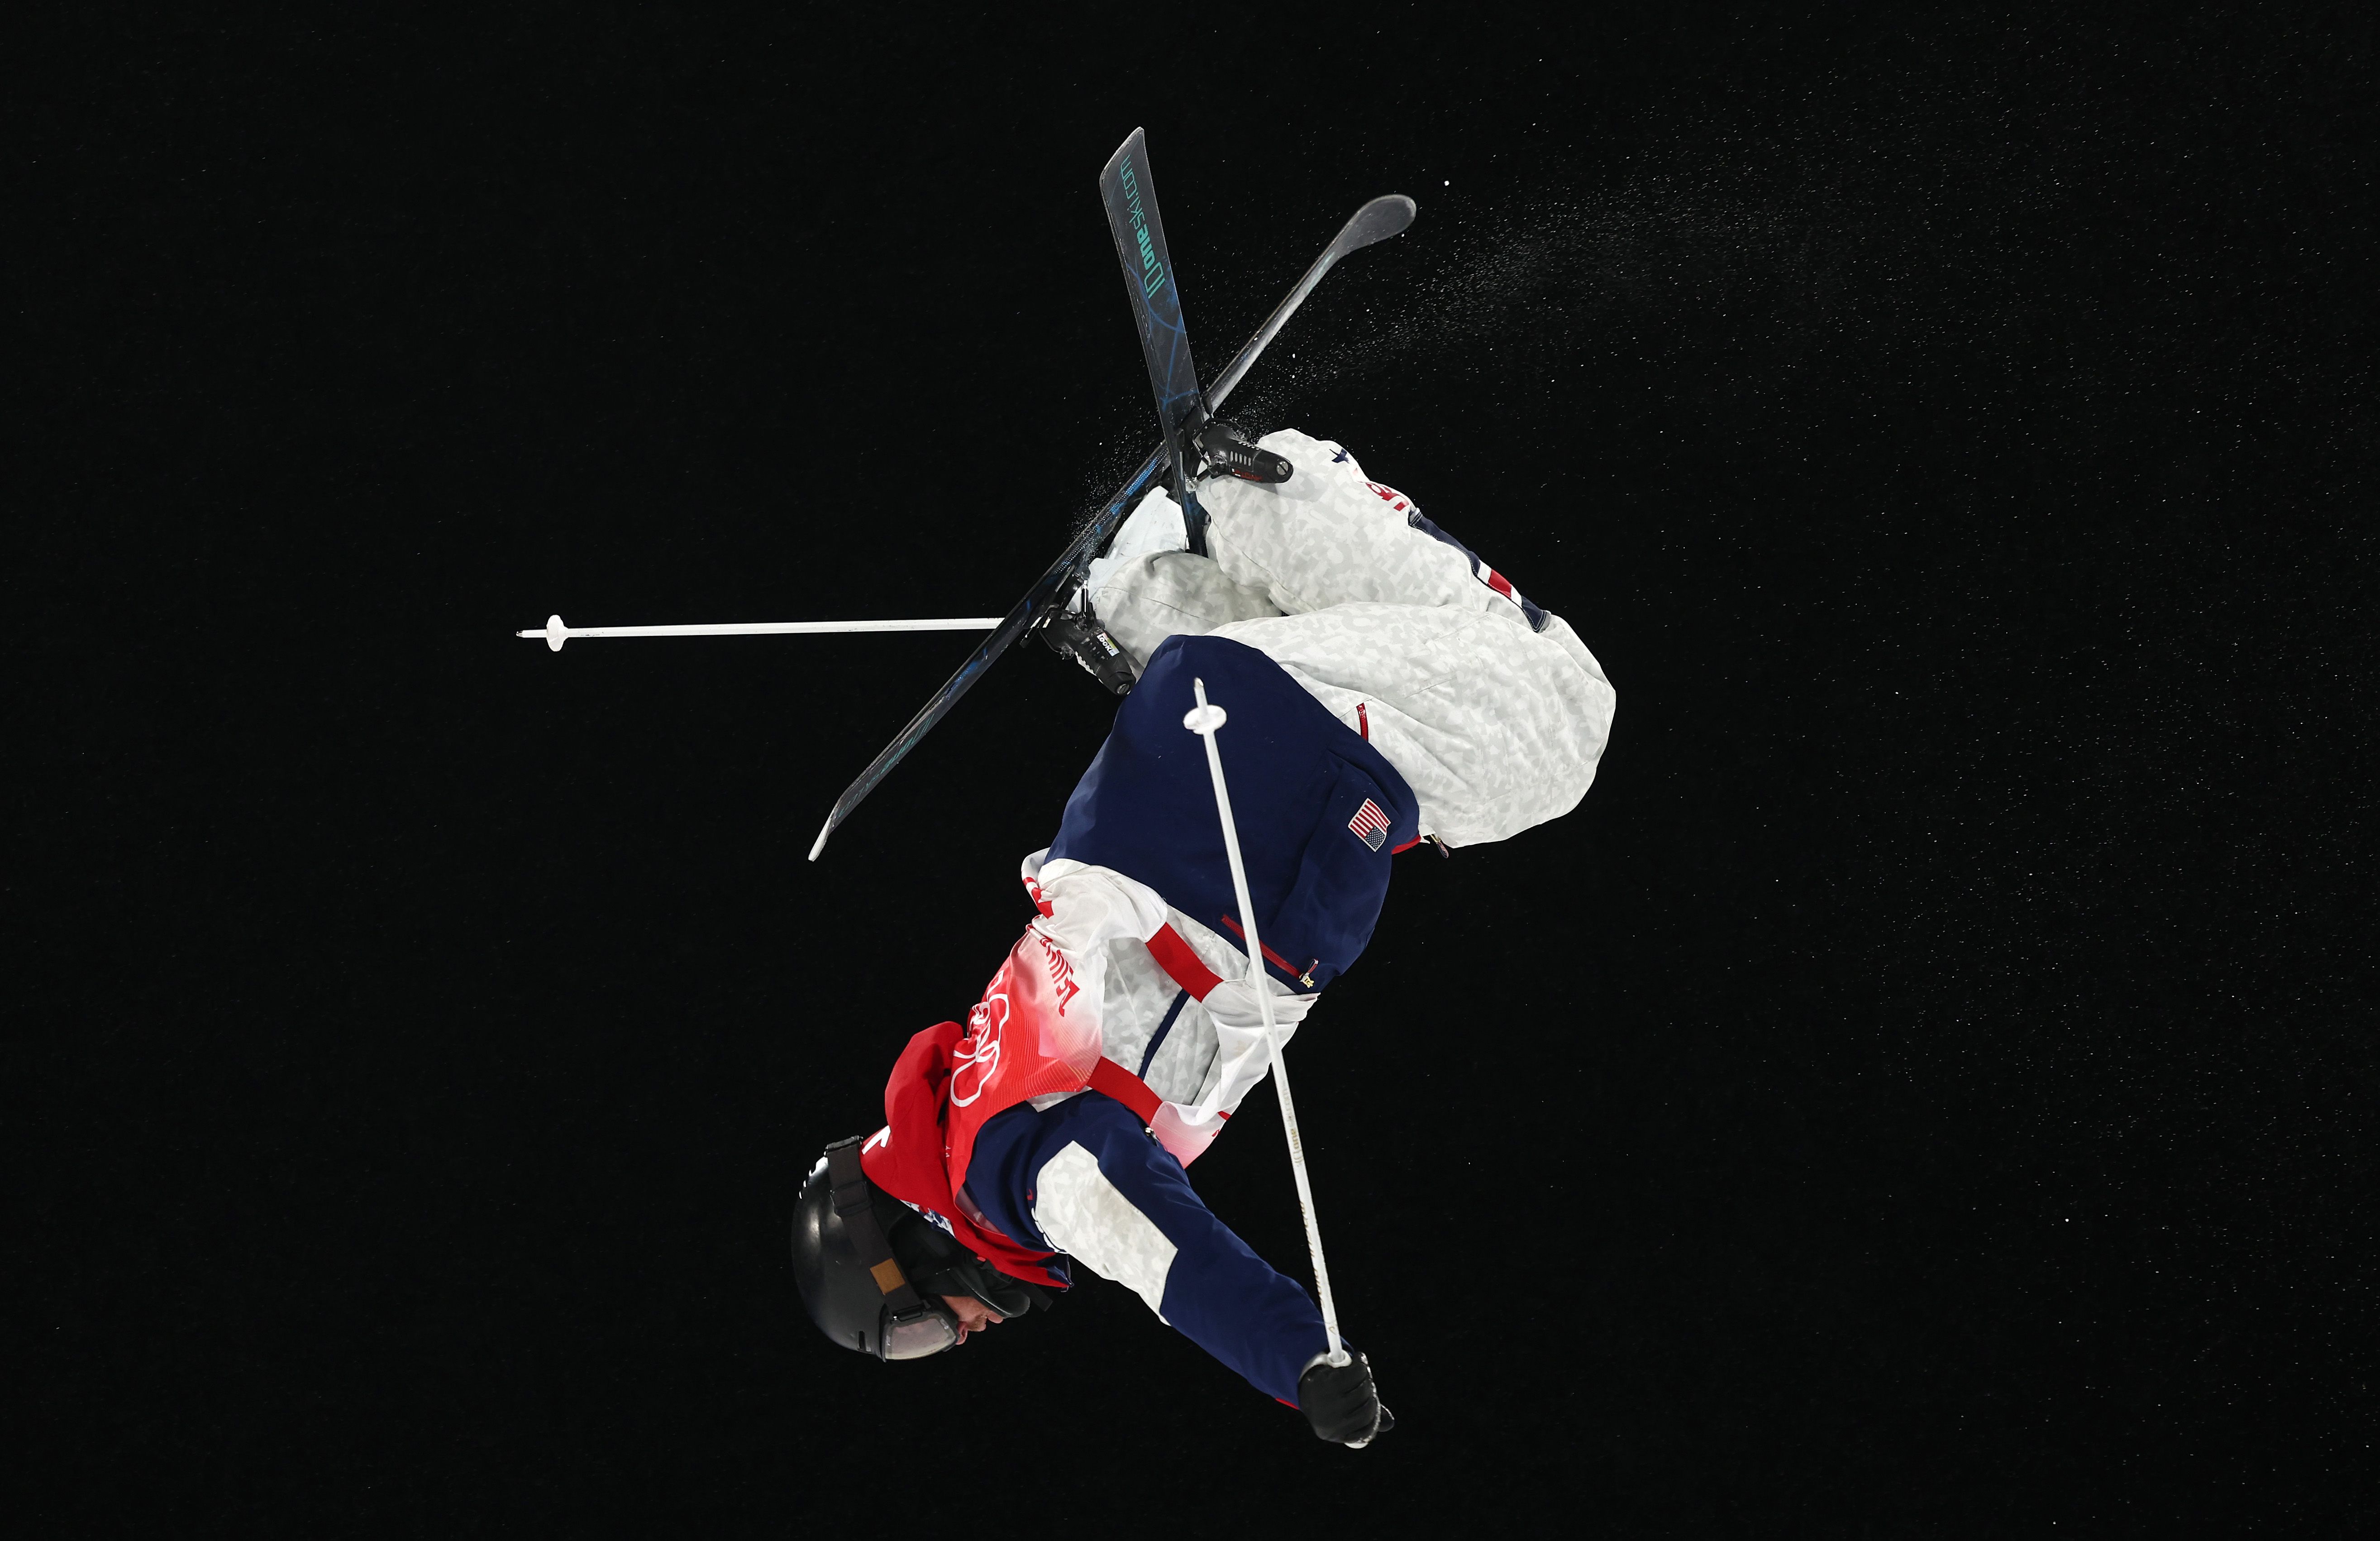  Dylan Walczyk of Team United States performs a trick during the Men's Freestyle Skiing Moguls Qualification during the Beijing 2022 Winter Olympic Games at Genting Snow Park on February 03, 2022 